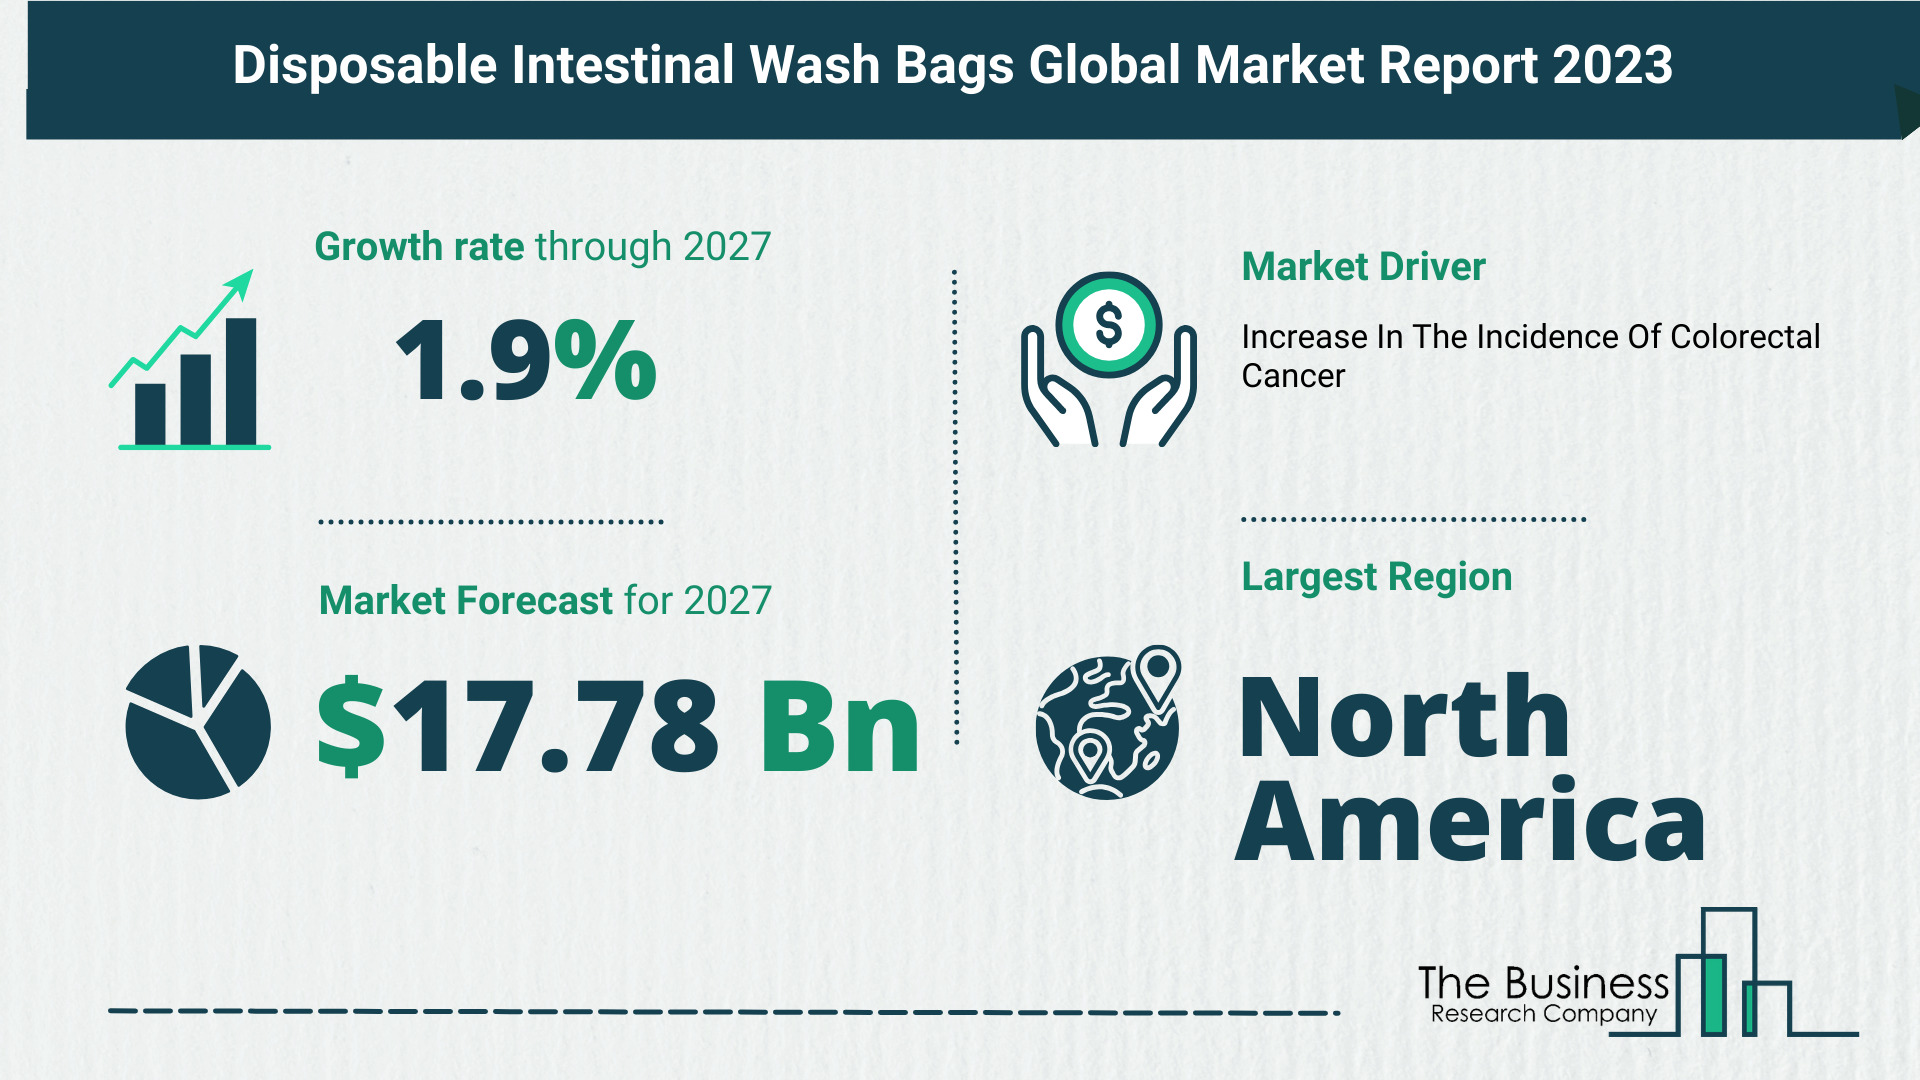 Top 5 Insights From The Disposable Intestinal Wash Bags Market Report 2023